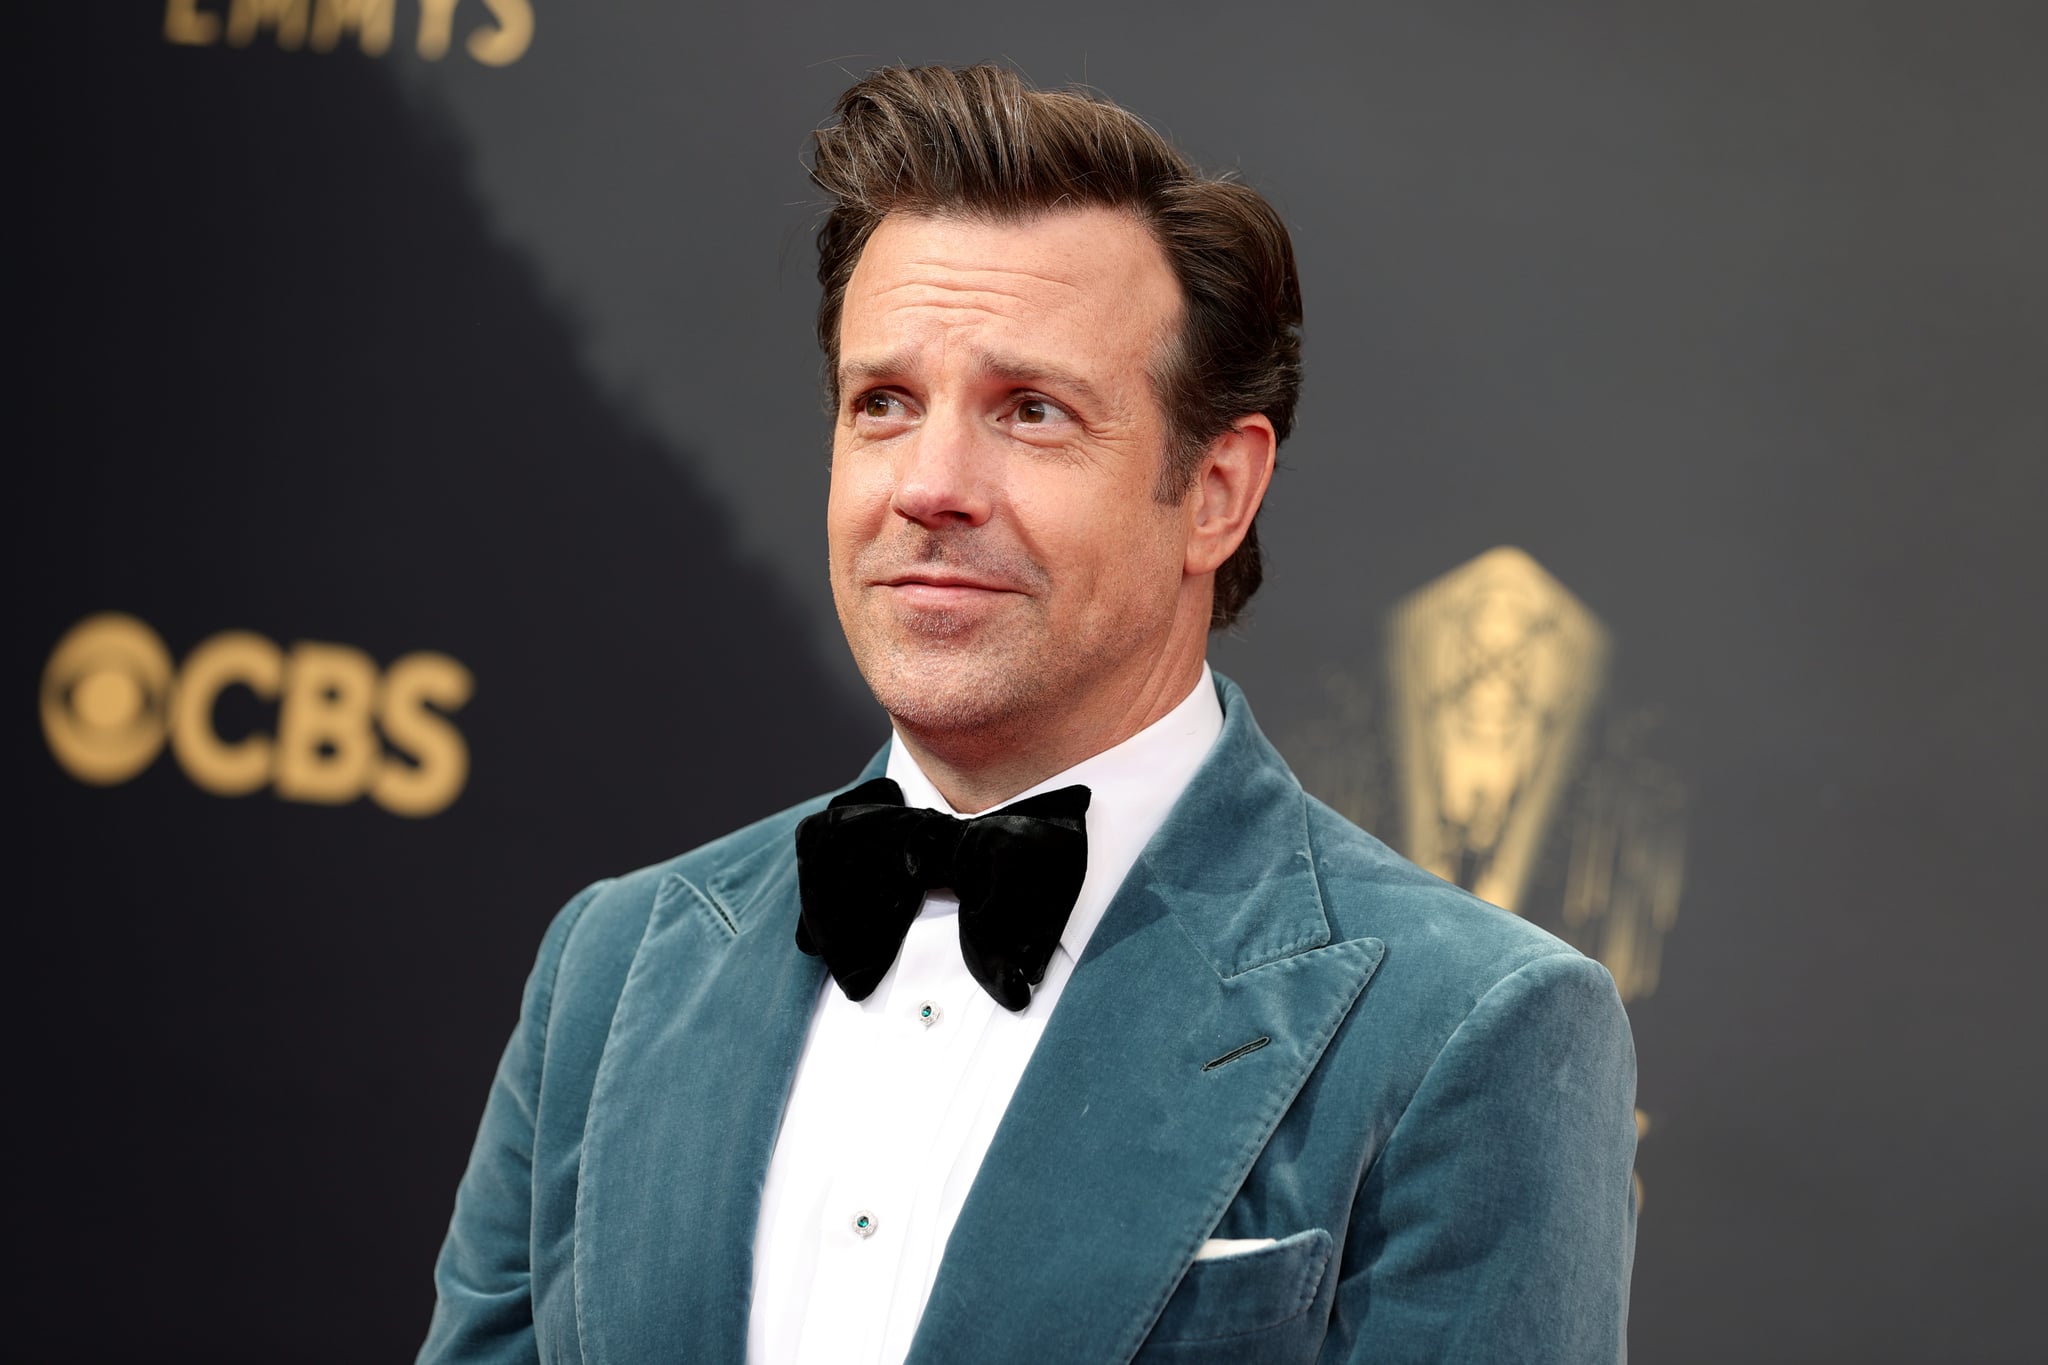 LOS ANGELES, CALIFORNIA - SEPTEMBER 19: Jason Sudeikis attends the 73rd Primetime Emmy Awards at L.A. LIVE on September 19, 2021 in Los Angeles, California. (Photo by Rich Fury/Getty Images)